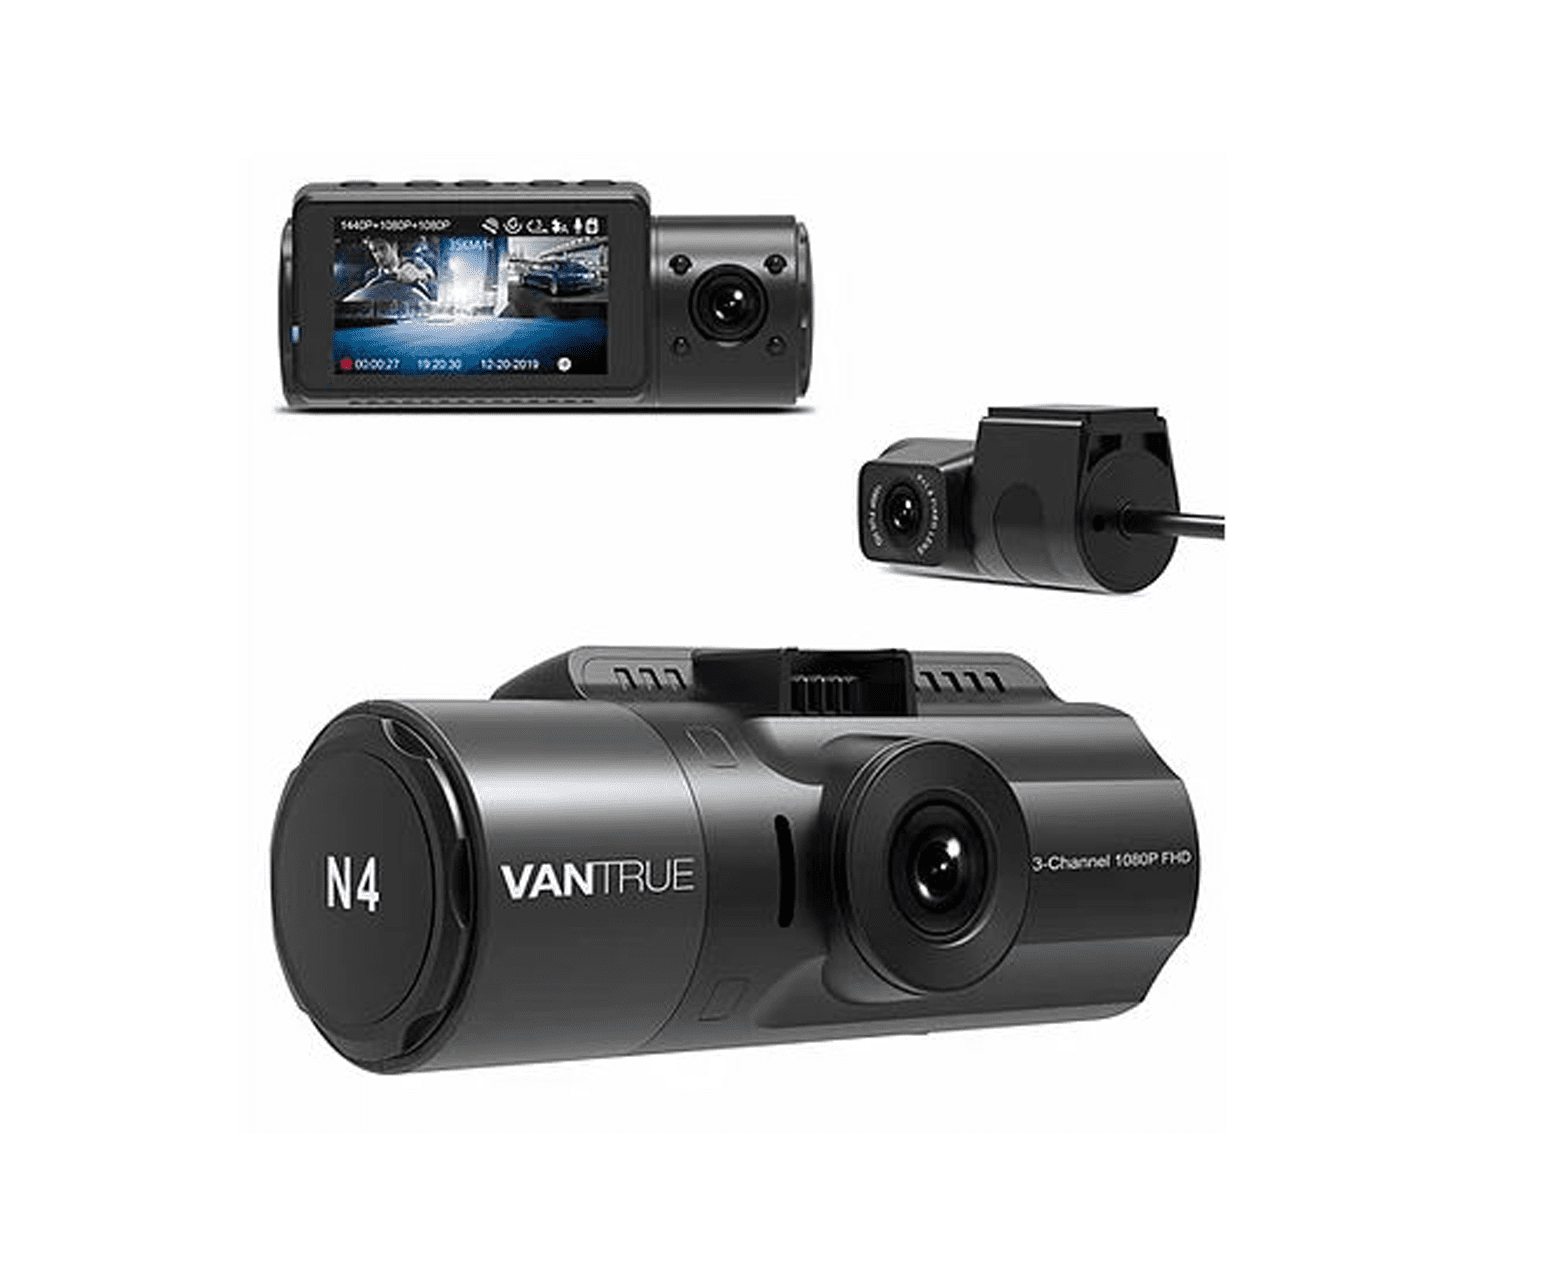 Find Out Why Everyone is Talking About The New Vantrue N4 Pro